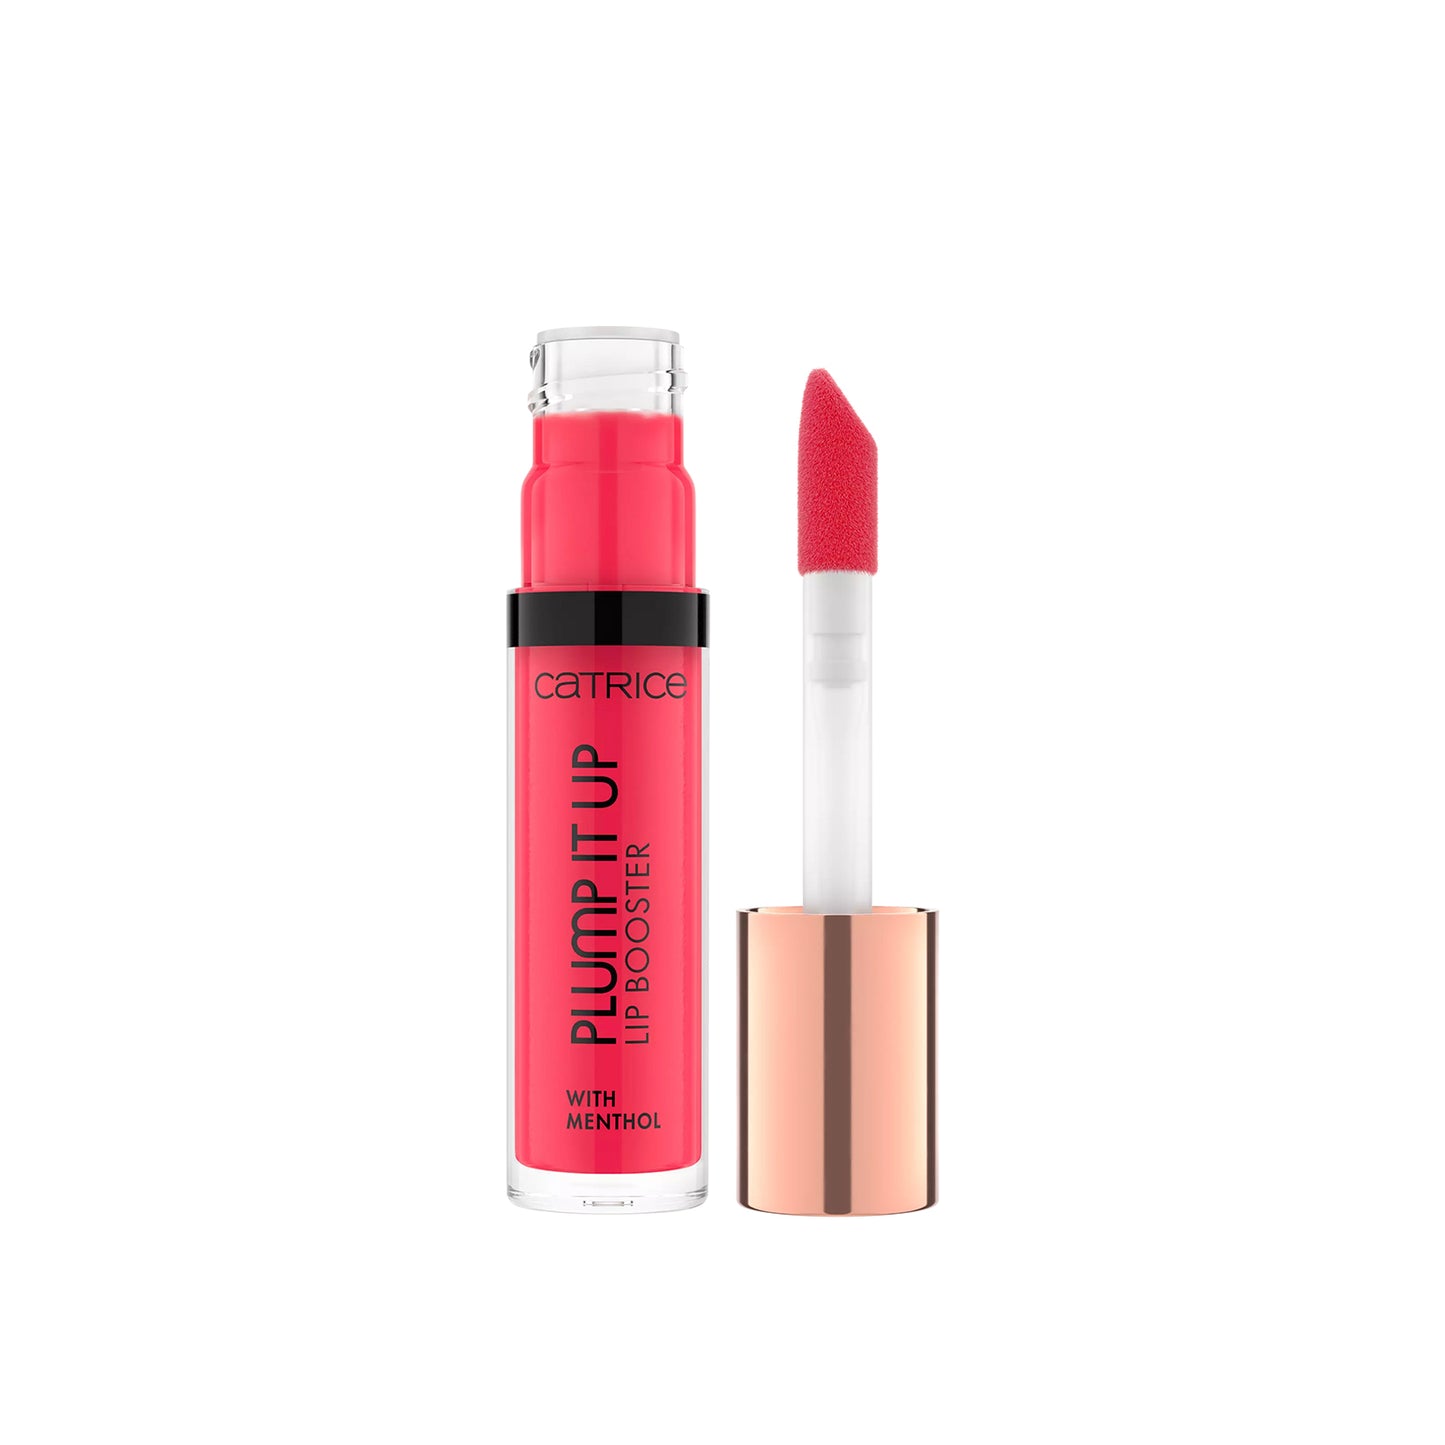 Catrice Plump It Up Lip Booster